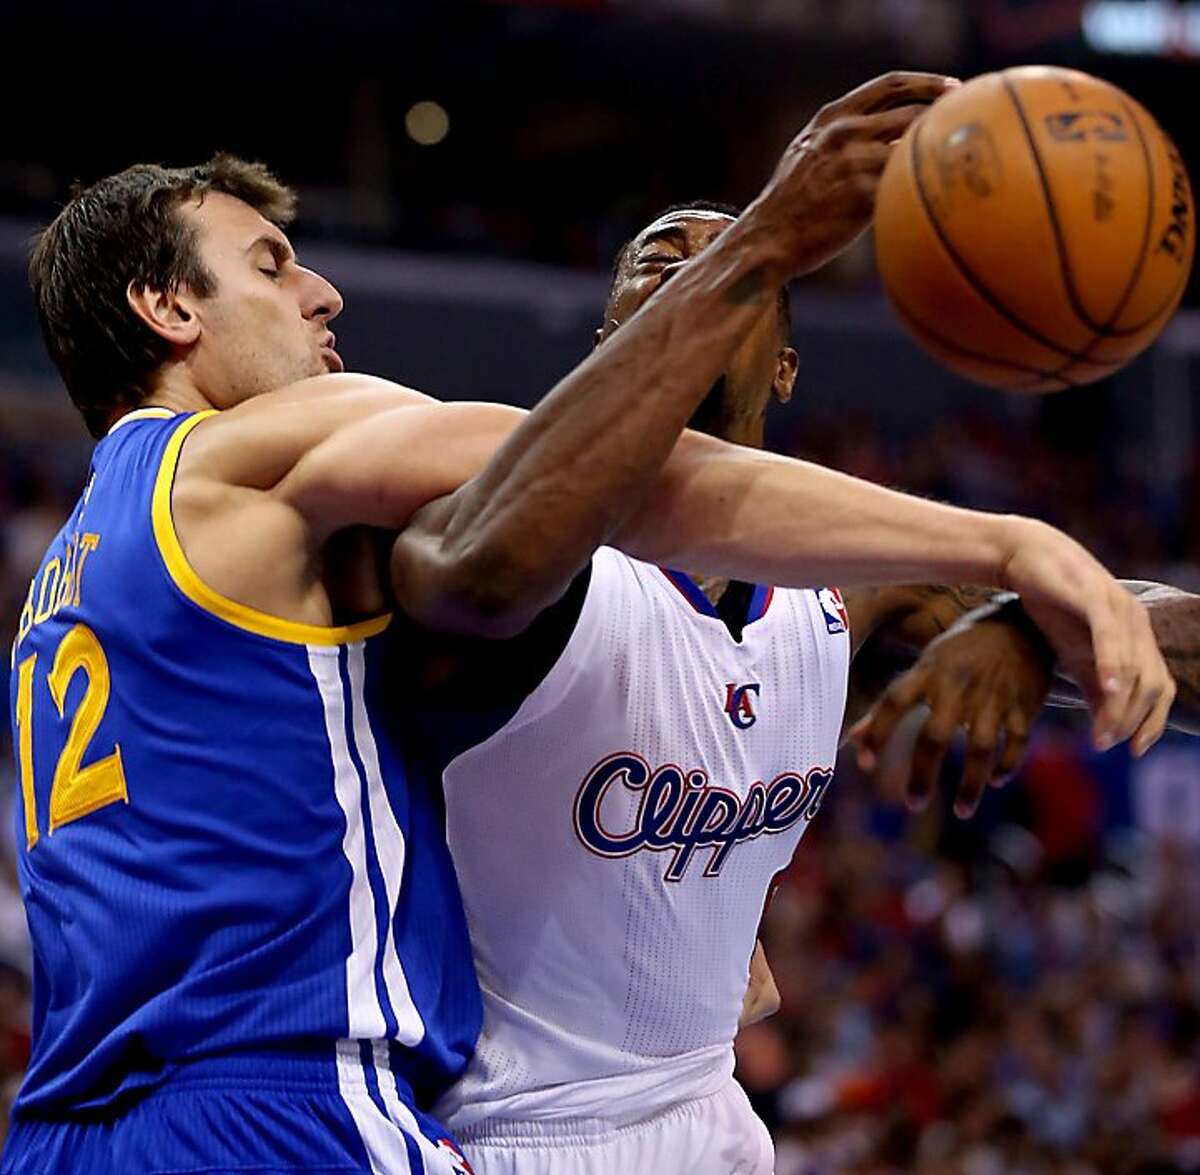 The Los Angeles Clippers' DeAndre Jordan, right, is fouled by the Golden State Warriors' Andrew Bogut, prompting an altercation in the first quarter at Staples Center in Los Angeles, California, on Thursday, October 31, 2013. (Luis Sinco/Los Angeles Times/MCT)